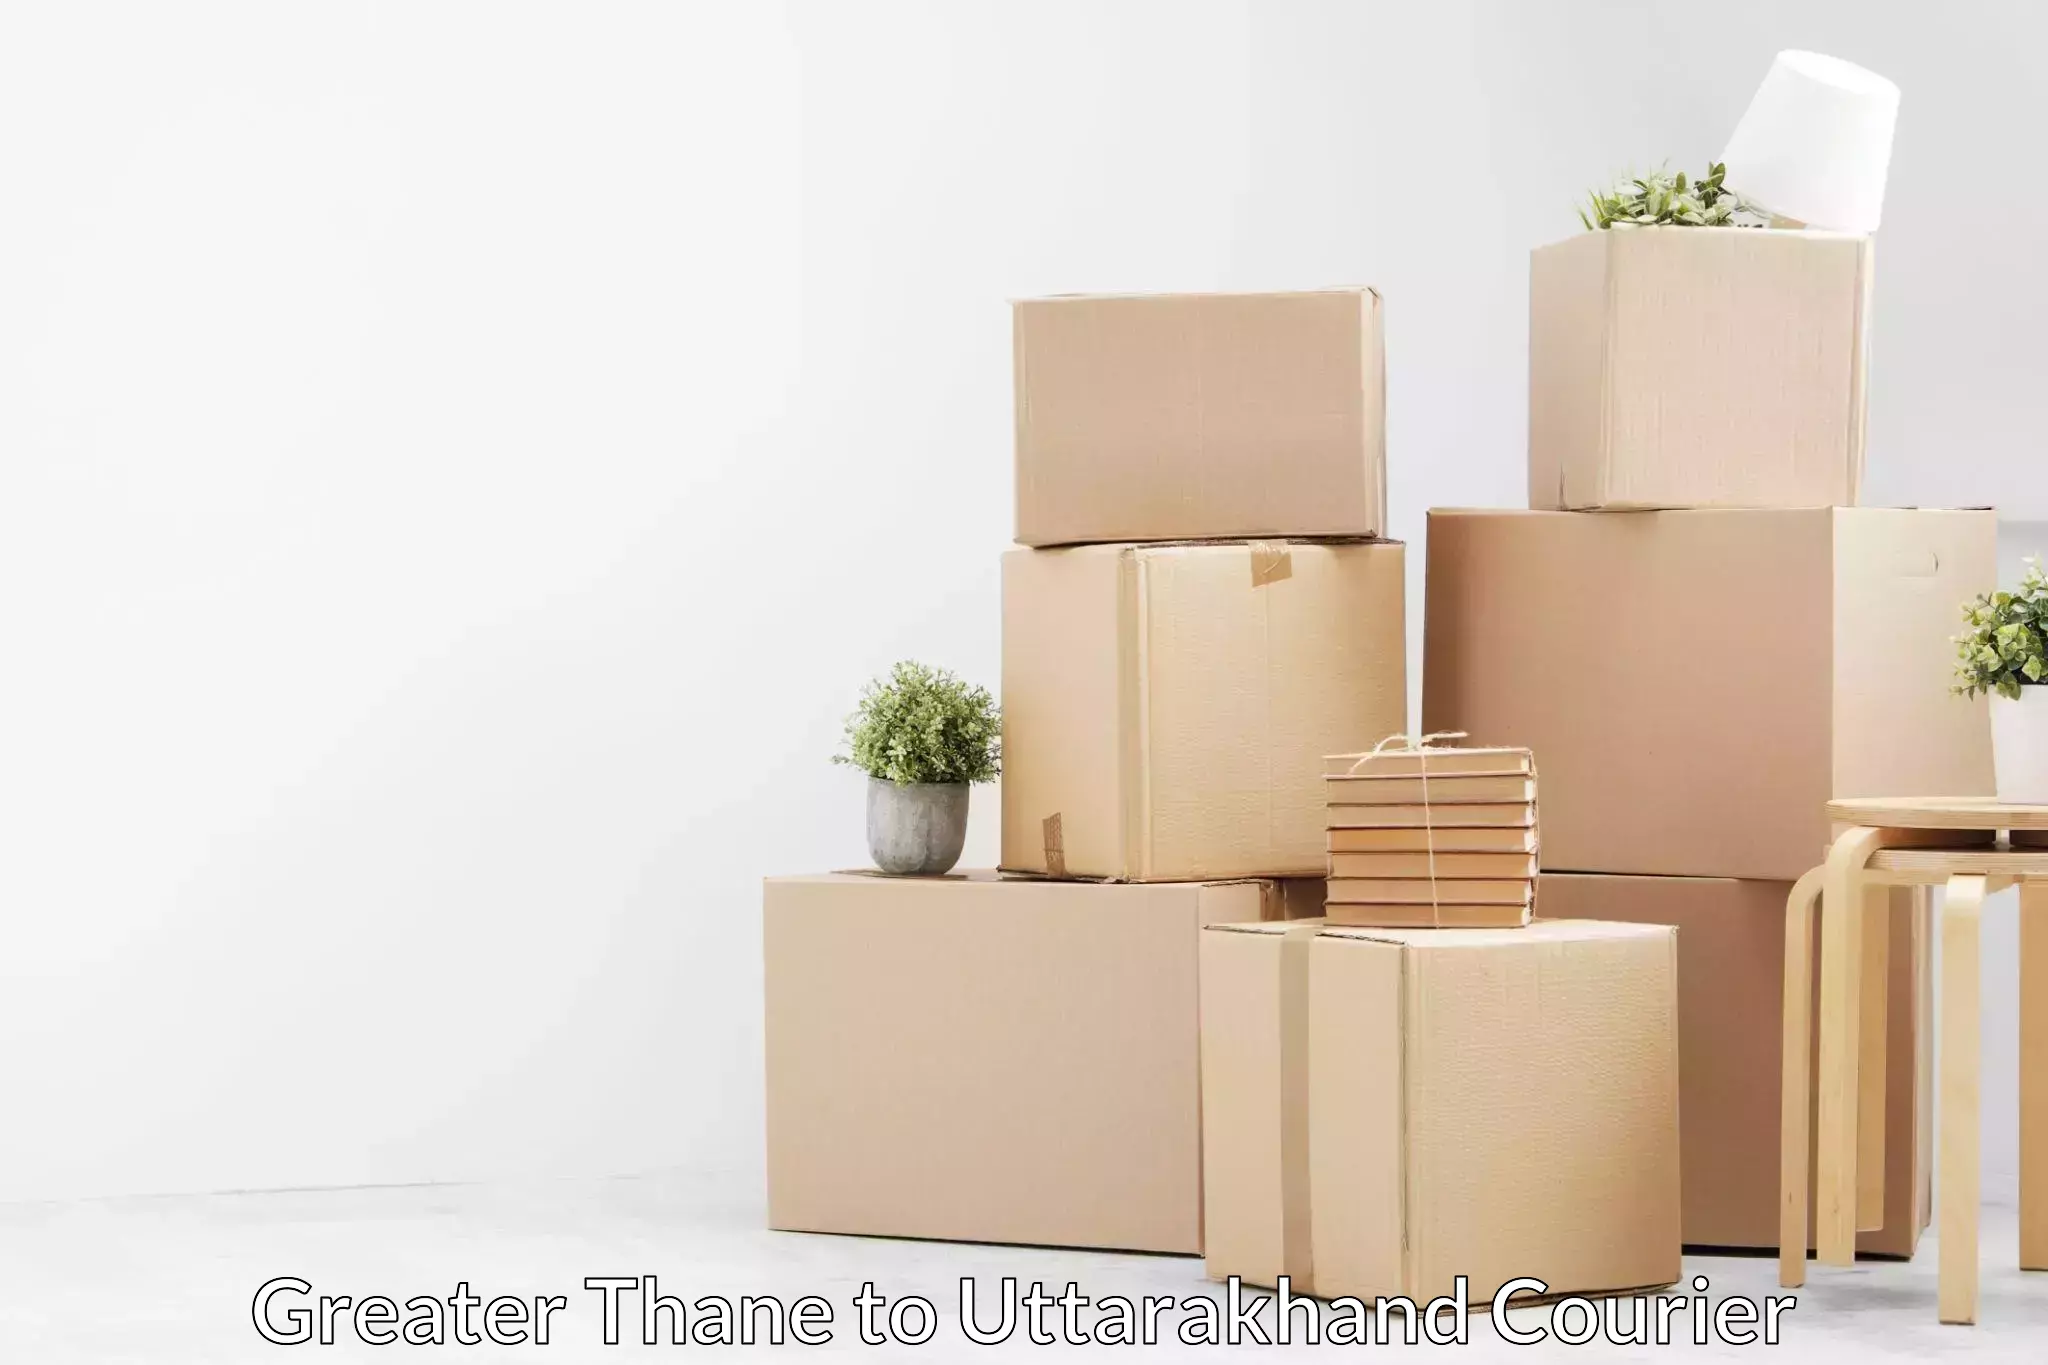 Efficient moving company Greater Thane to IIT Roorkee